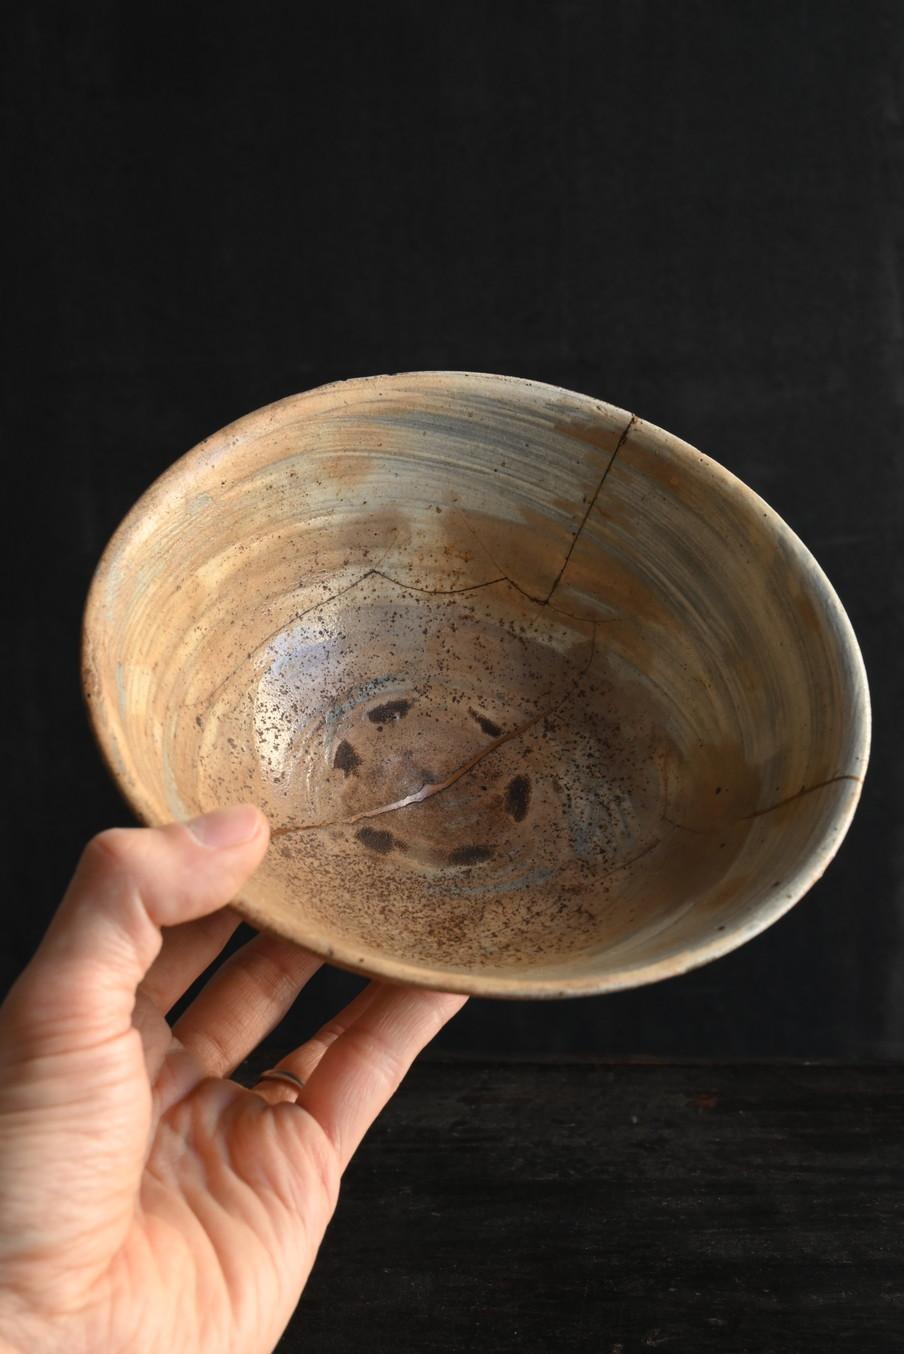 This is a pottery made in the early Joseon Dynasty of Korea.
This tea bowl was made around the 15th to 16th century.
A characteristic of this era was that pure white pottery was only allowed to be used by the privileged class.
Therefore, common